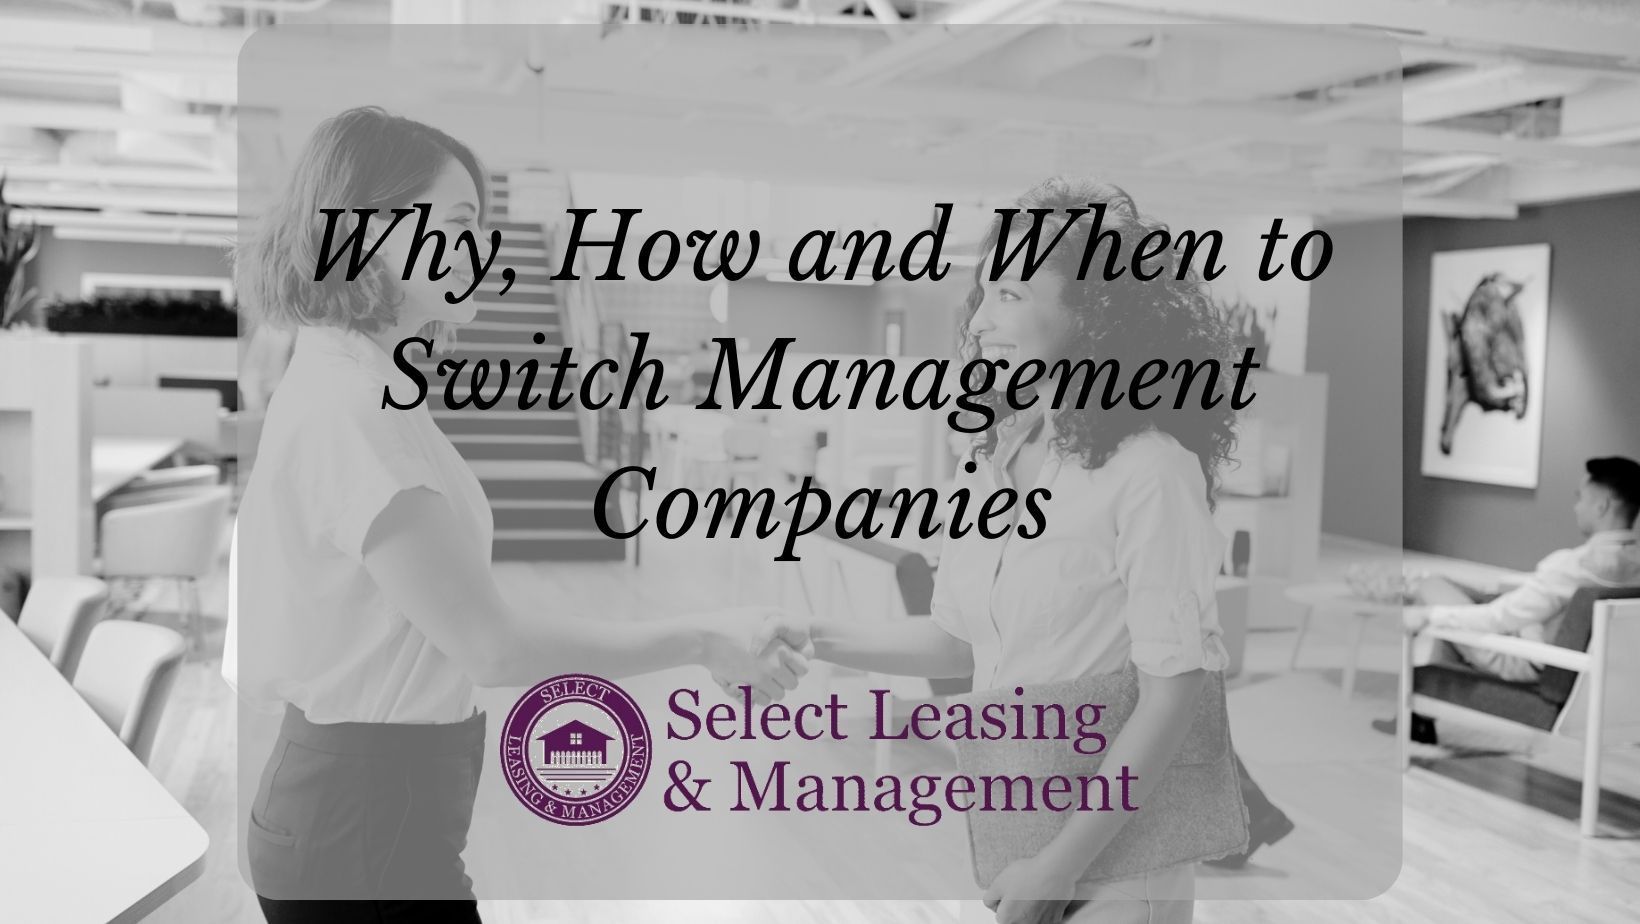 Why, How, and When to Switch Management Companies